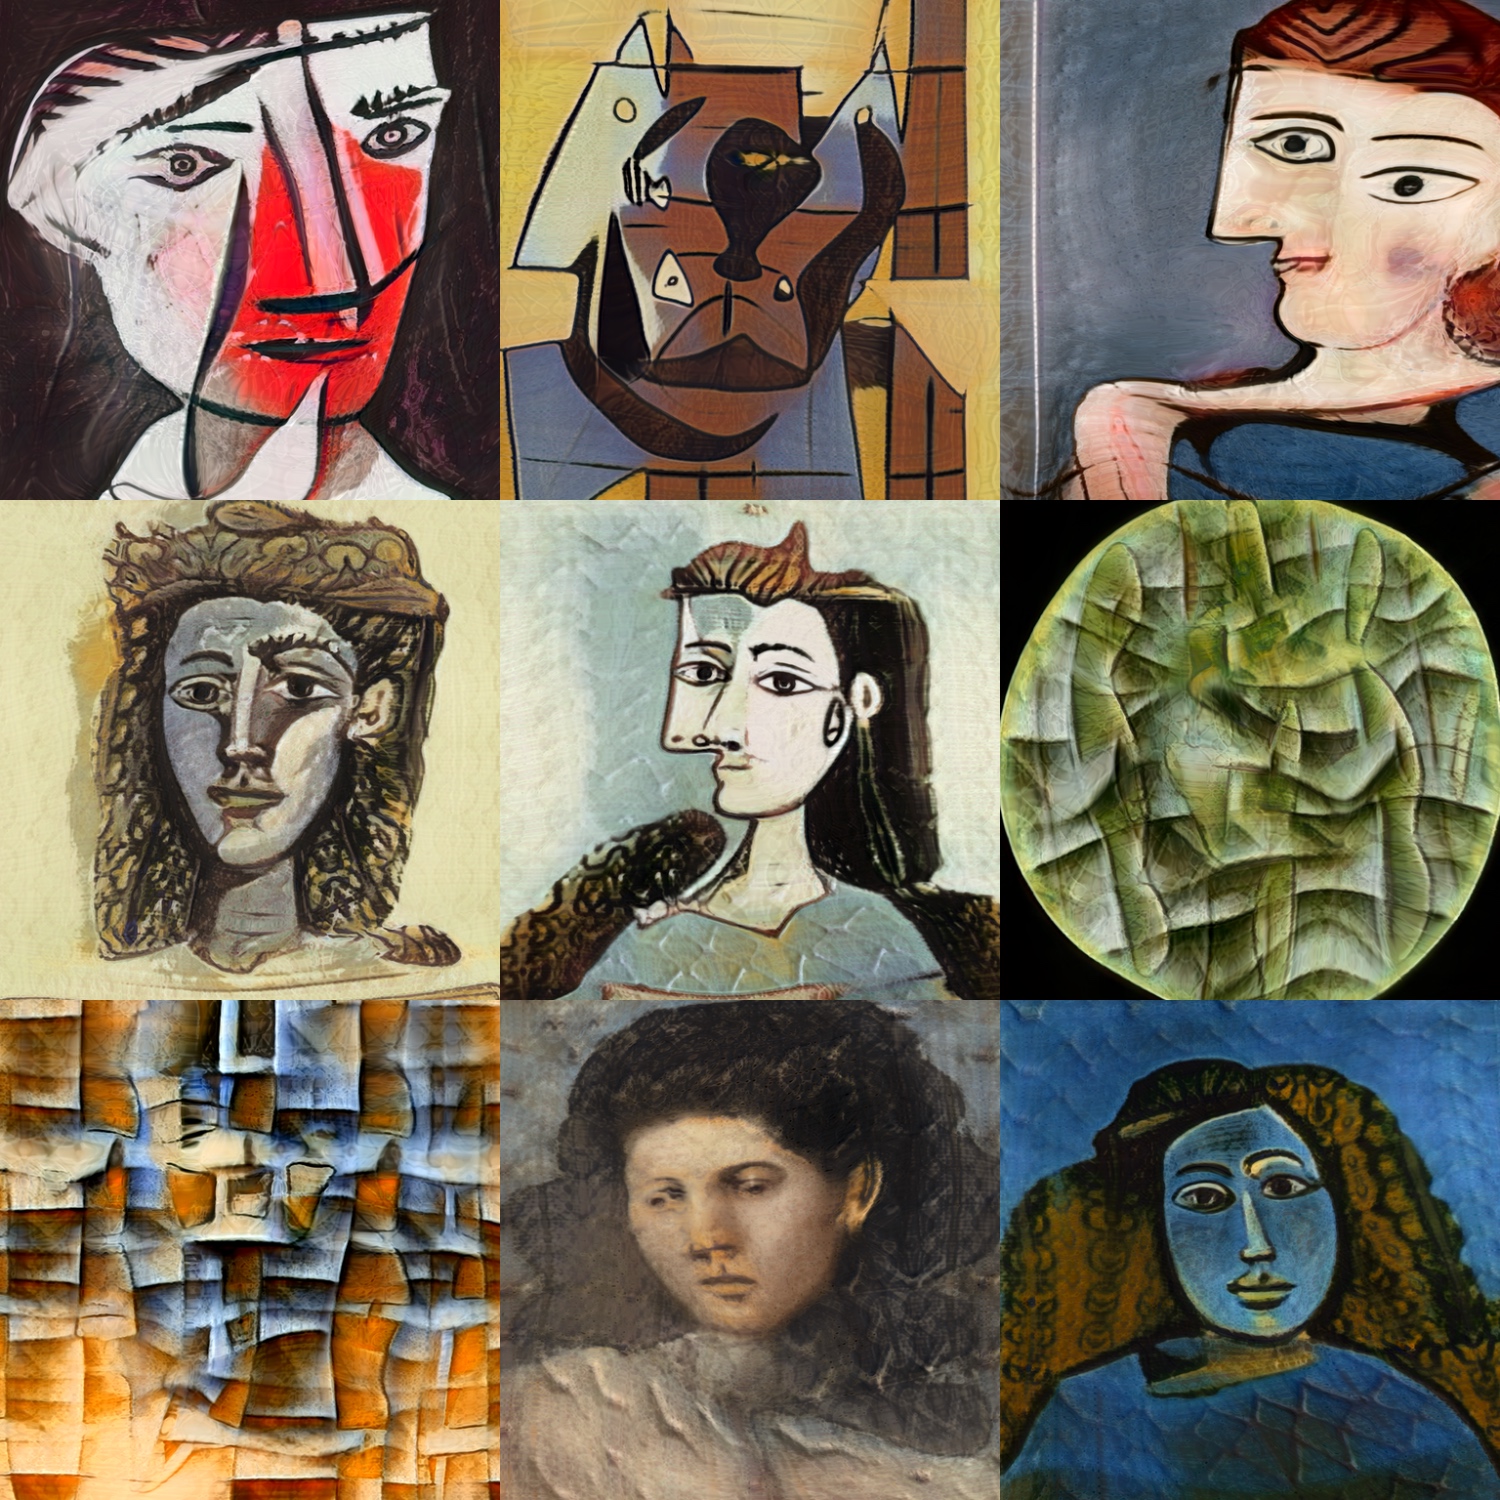 thepicassoproject – Pablo Picasso. Reborn as a Neural Network. Fine Art in NFT Form.